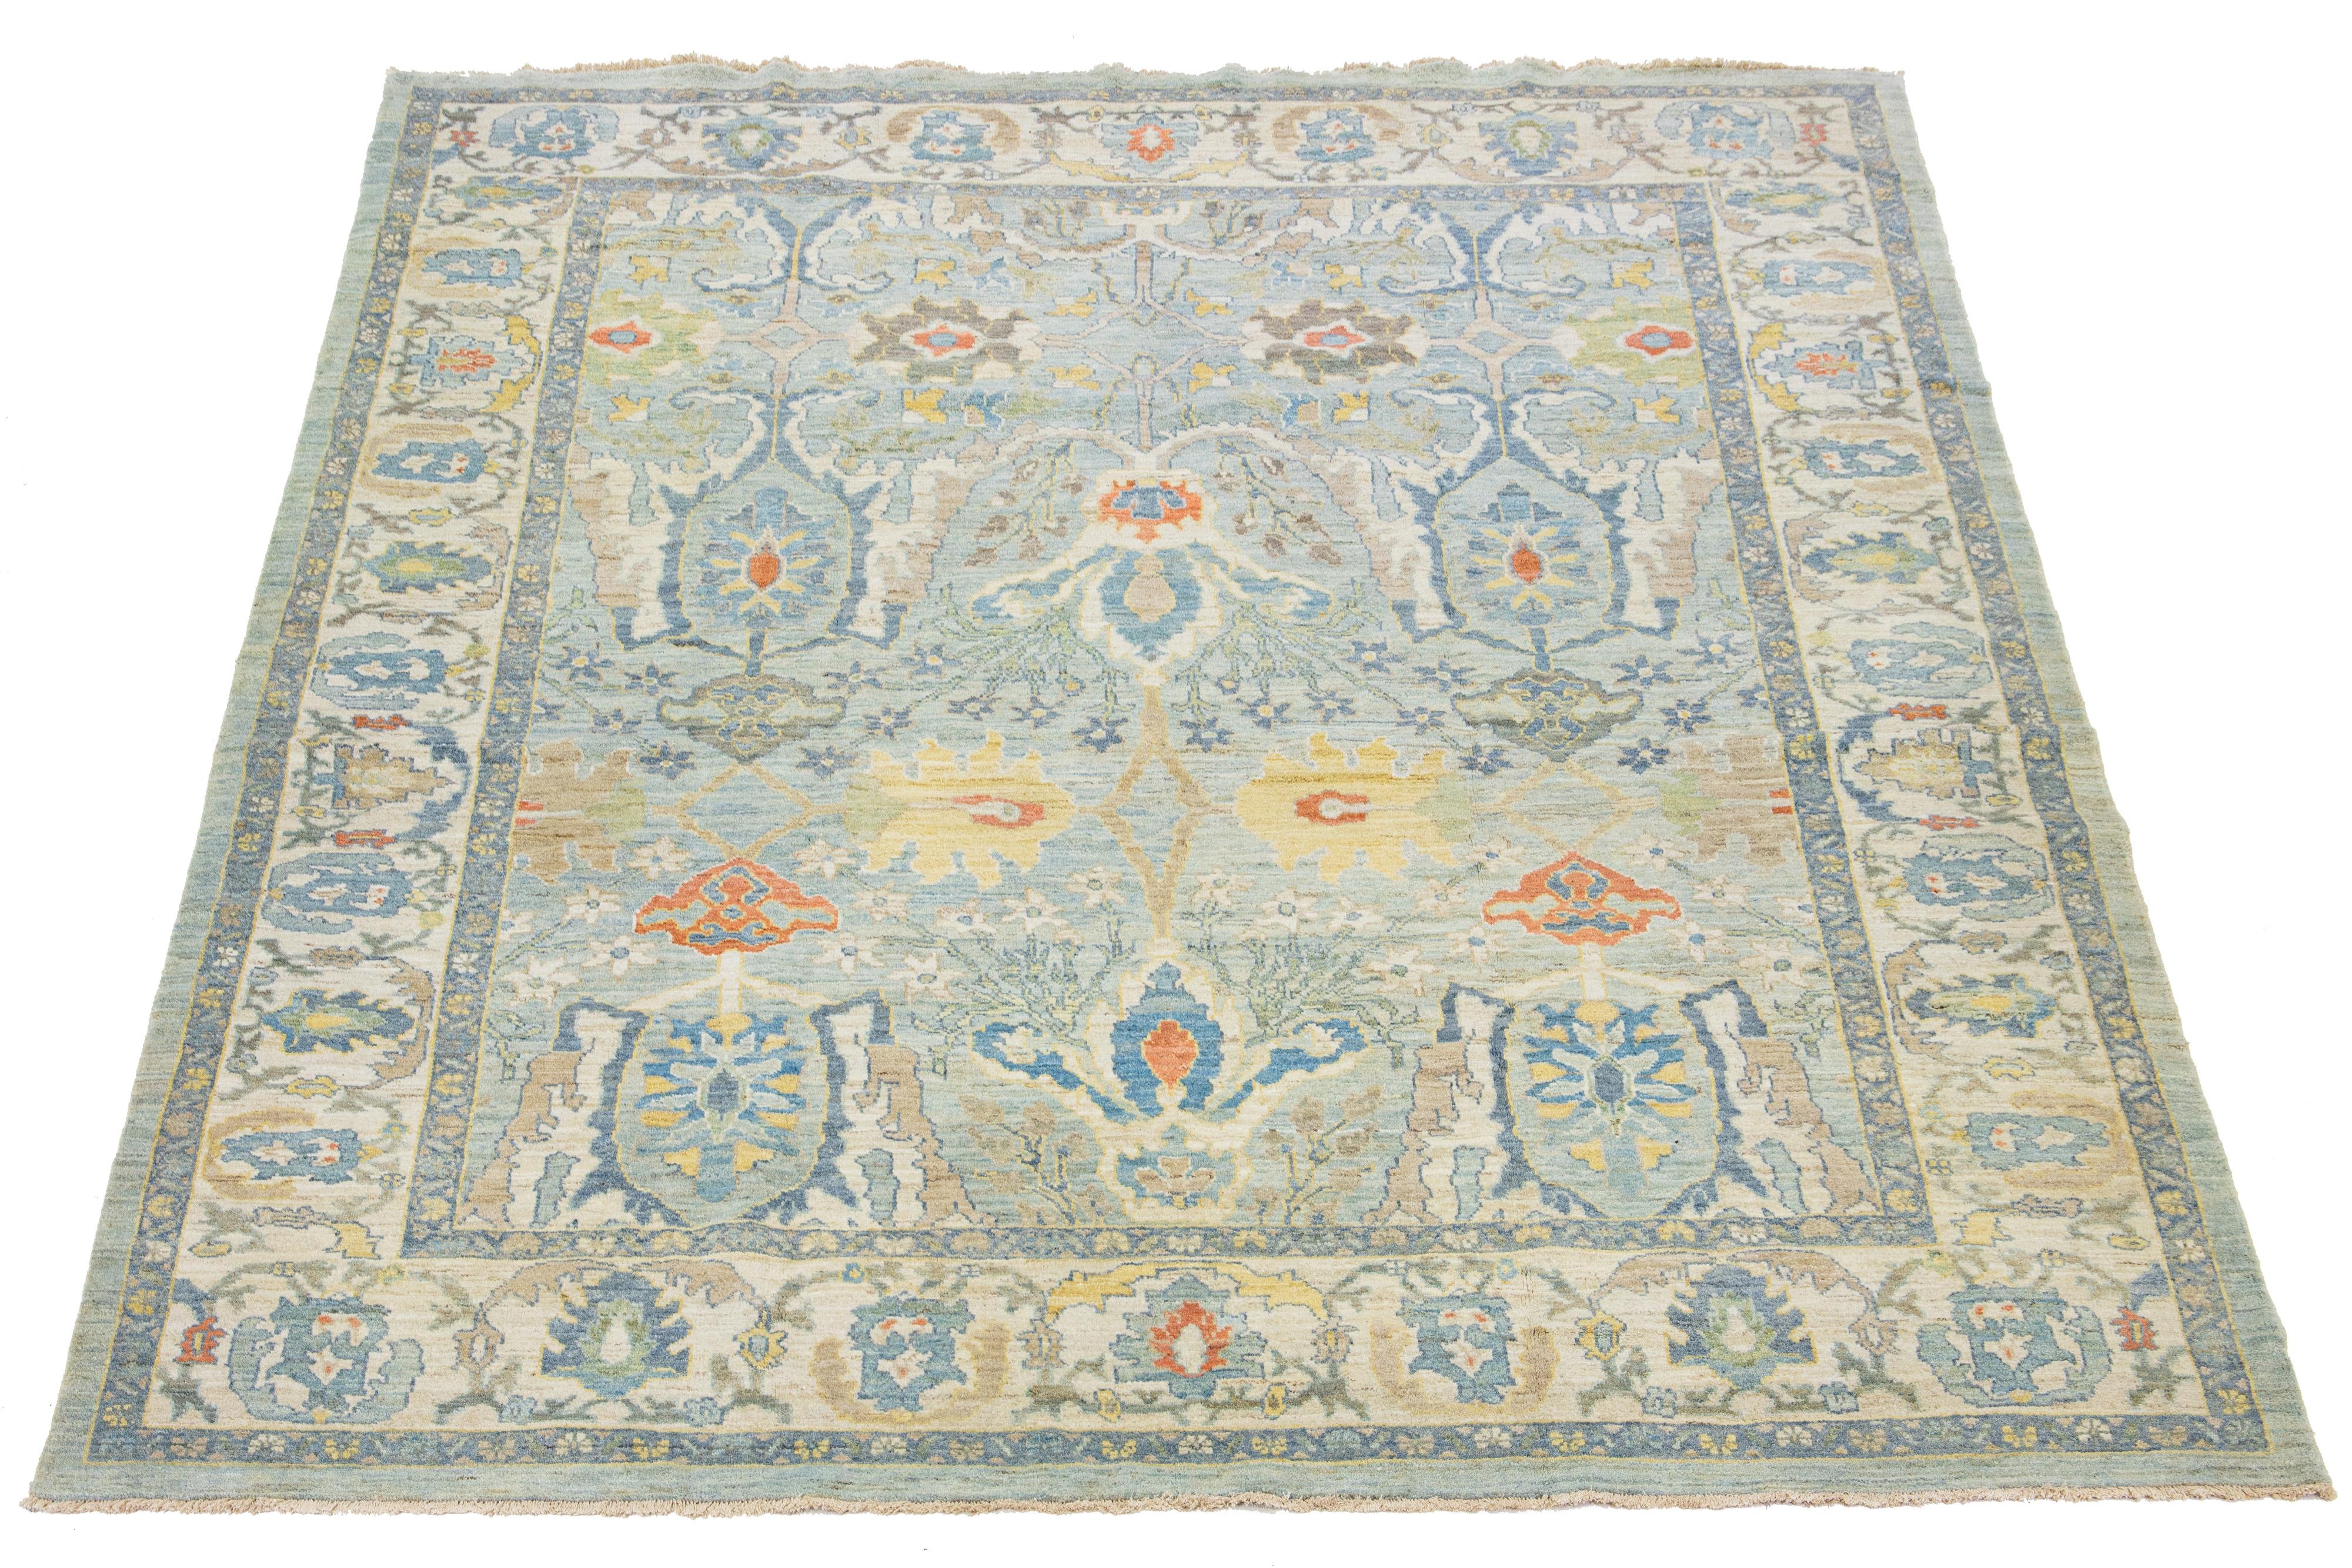 Beautiful room-size modern Sultanabad hand-knotted wool rug with a light blue field. This Sultanabad rug has a beige frame and yellow, orange, and green accents in a gorgeous classic floral pattern.

This rug measures 10'1